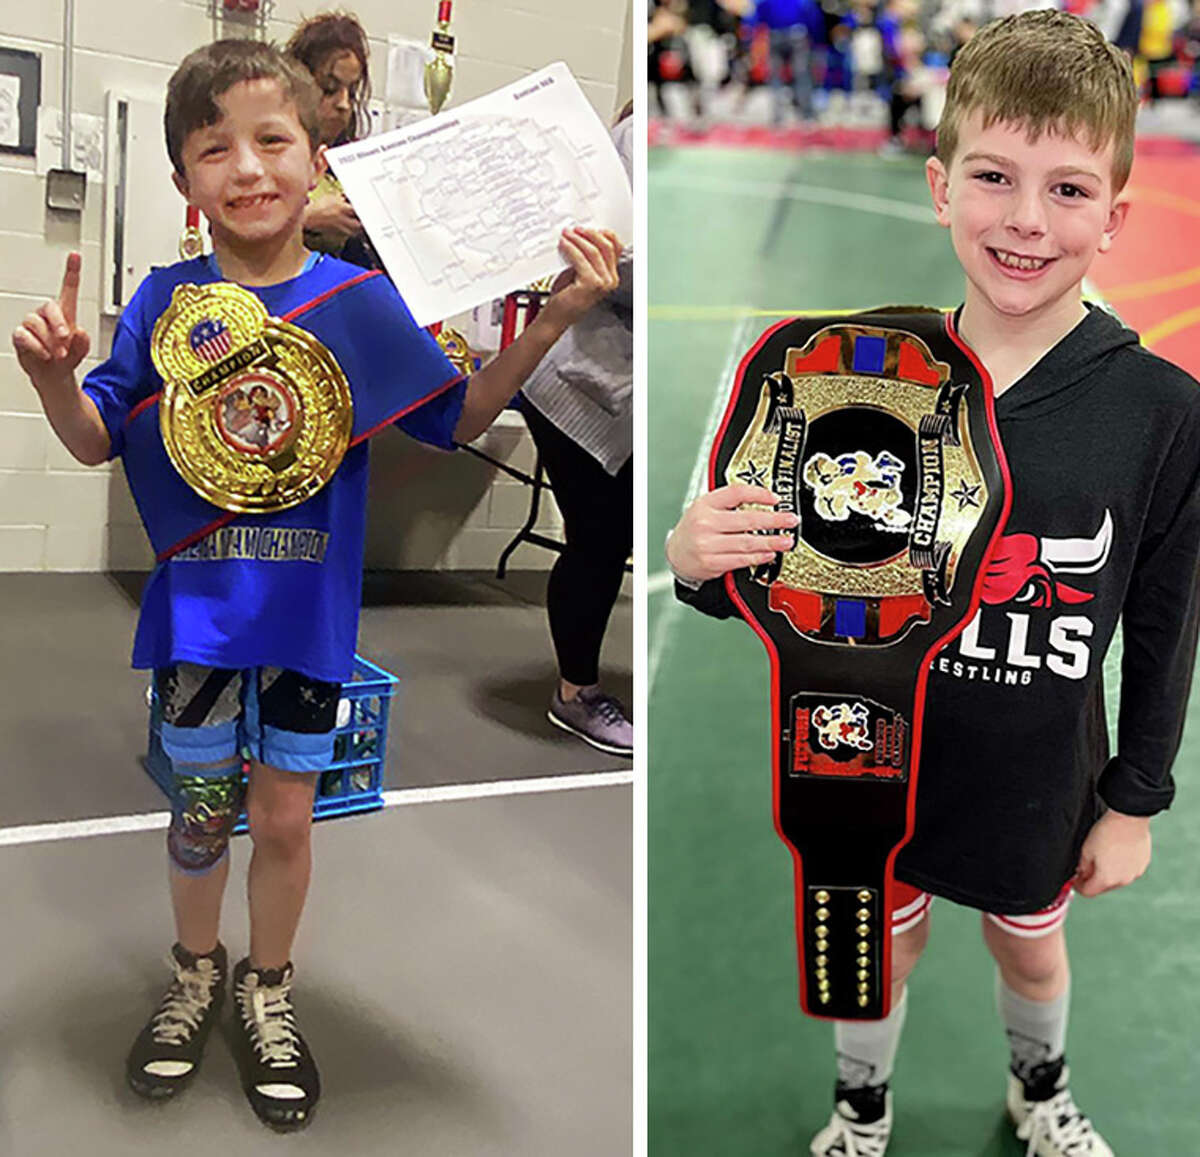 Champions start young Four youngsters grab state titles